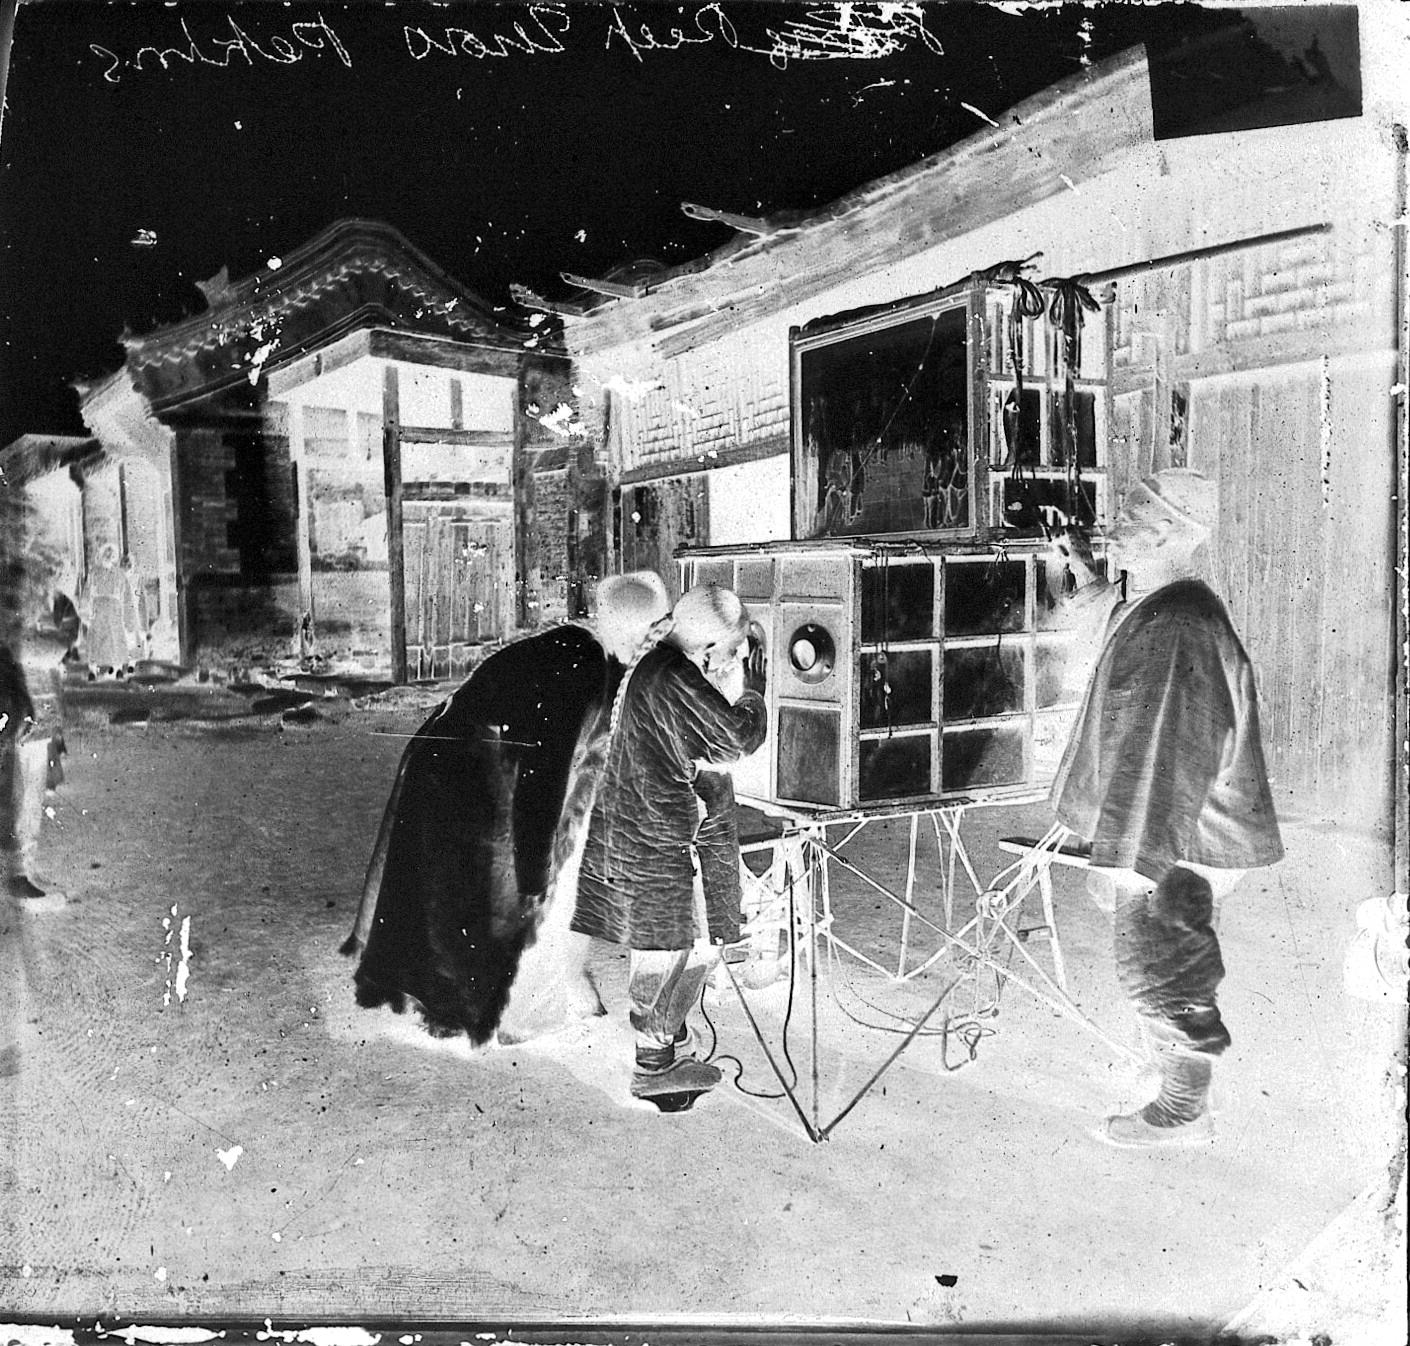 Looking at a peep show in the street, Beijing, c.1870. Photograph by John Thomson. The exhibition prints were made from glass negatives digitised by the Wellcome Collection. Credit: Wellcome Collection. Attribution 4.0 International (CC BY 4.0).